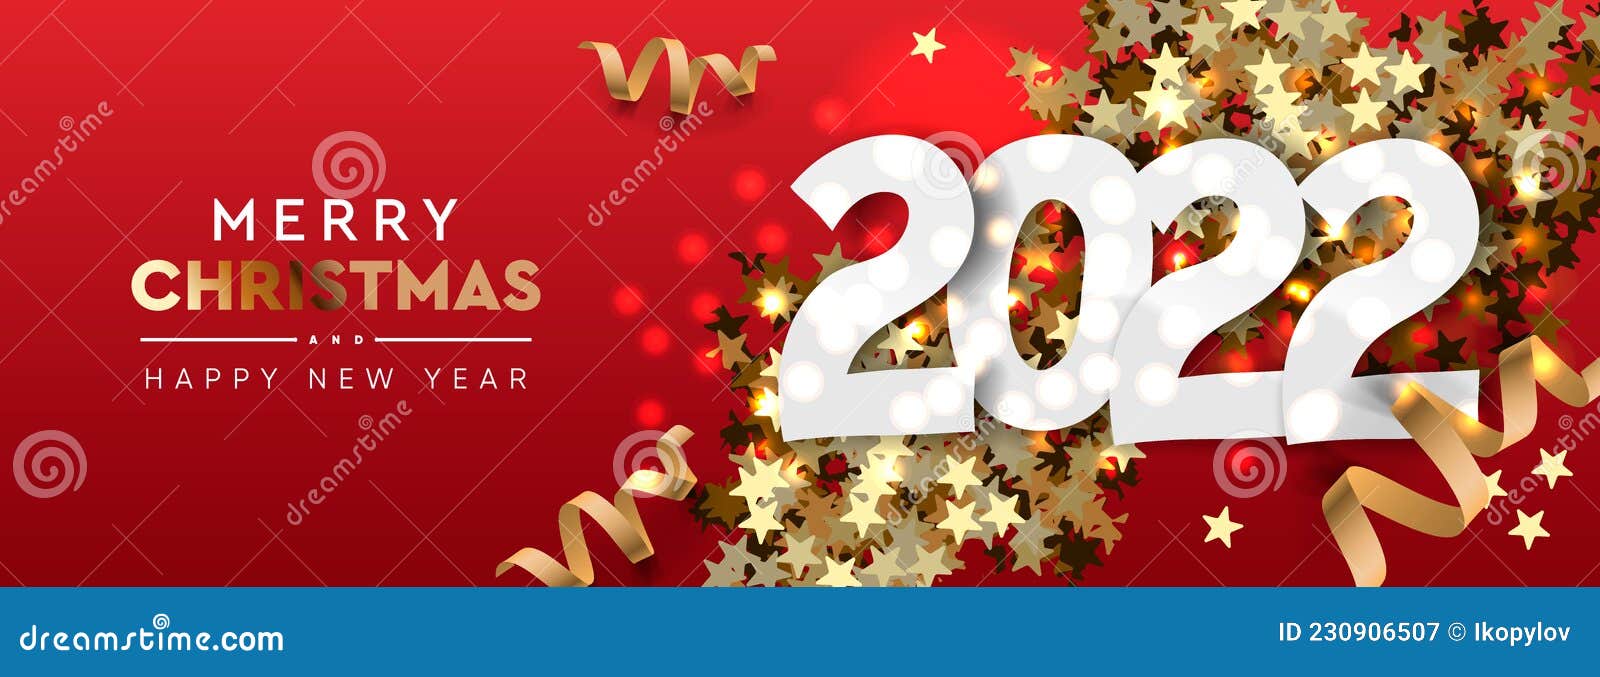 2022 Merry Christmas and Happy New Year Horizontal Background Stock Vector  - Illustration of decoration, confetti: 230906507